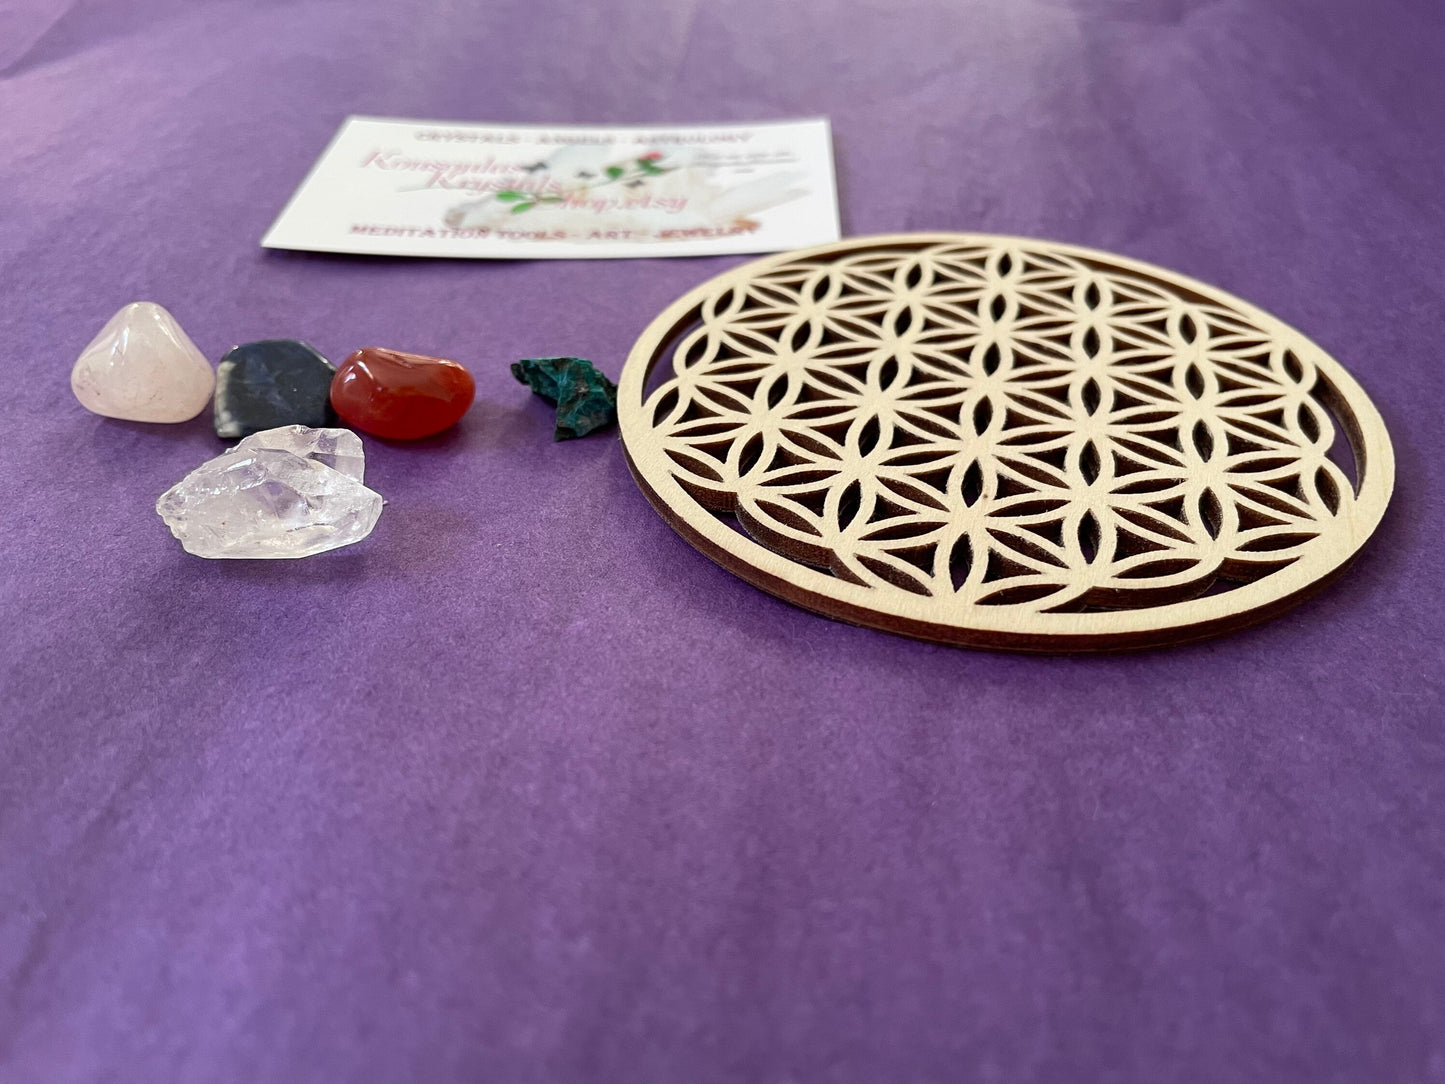 Let’s just admit it, the struggle is real!  This unique Parenting large stones crystal set & grid will assist with parenting and pregnancy!